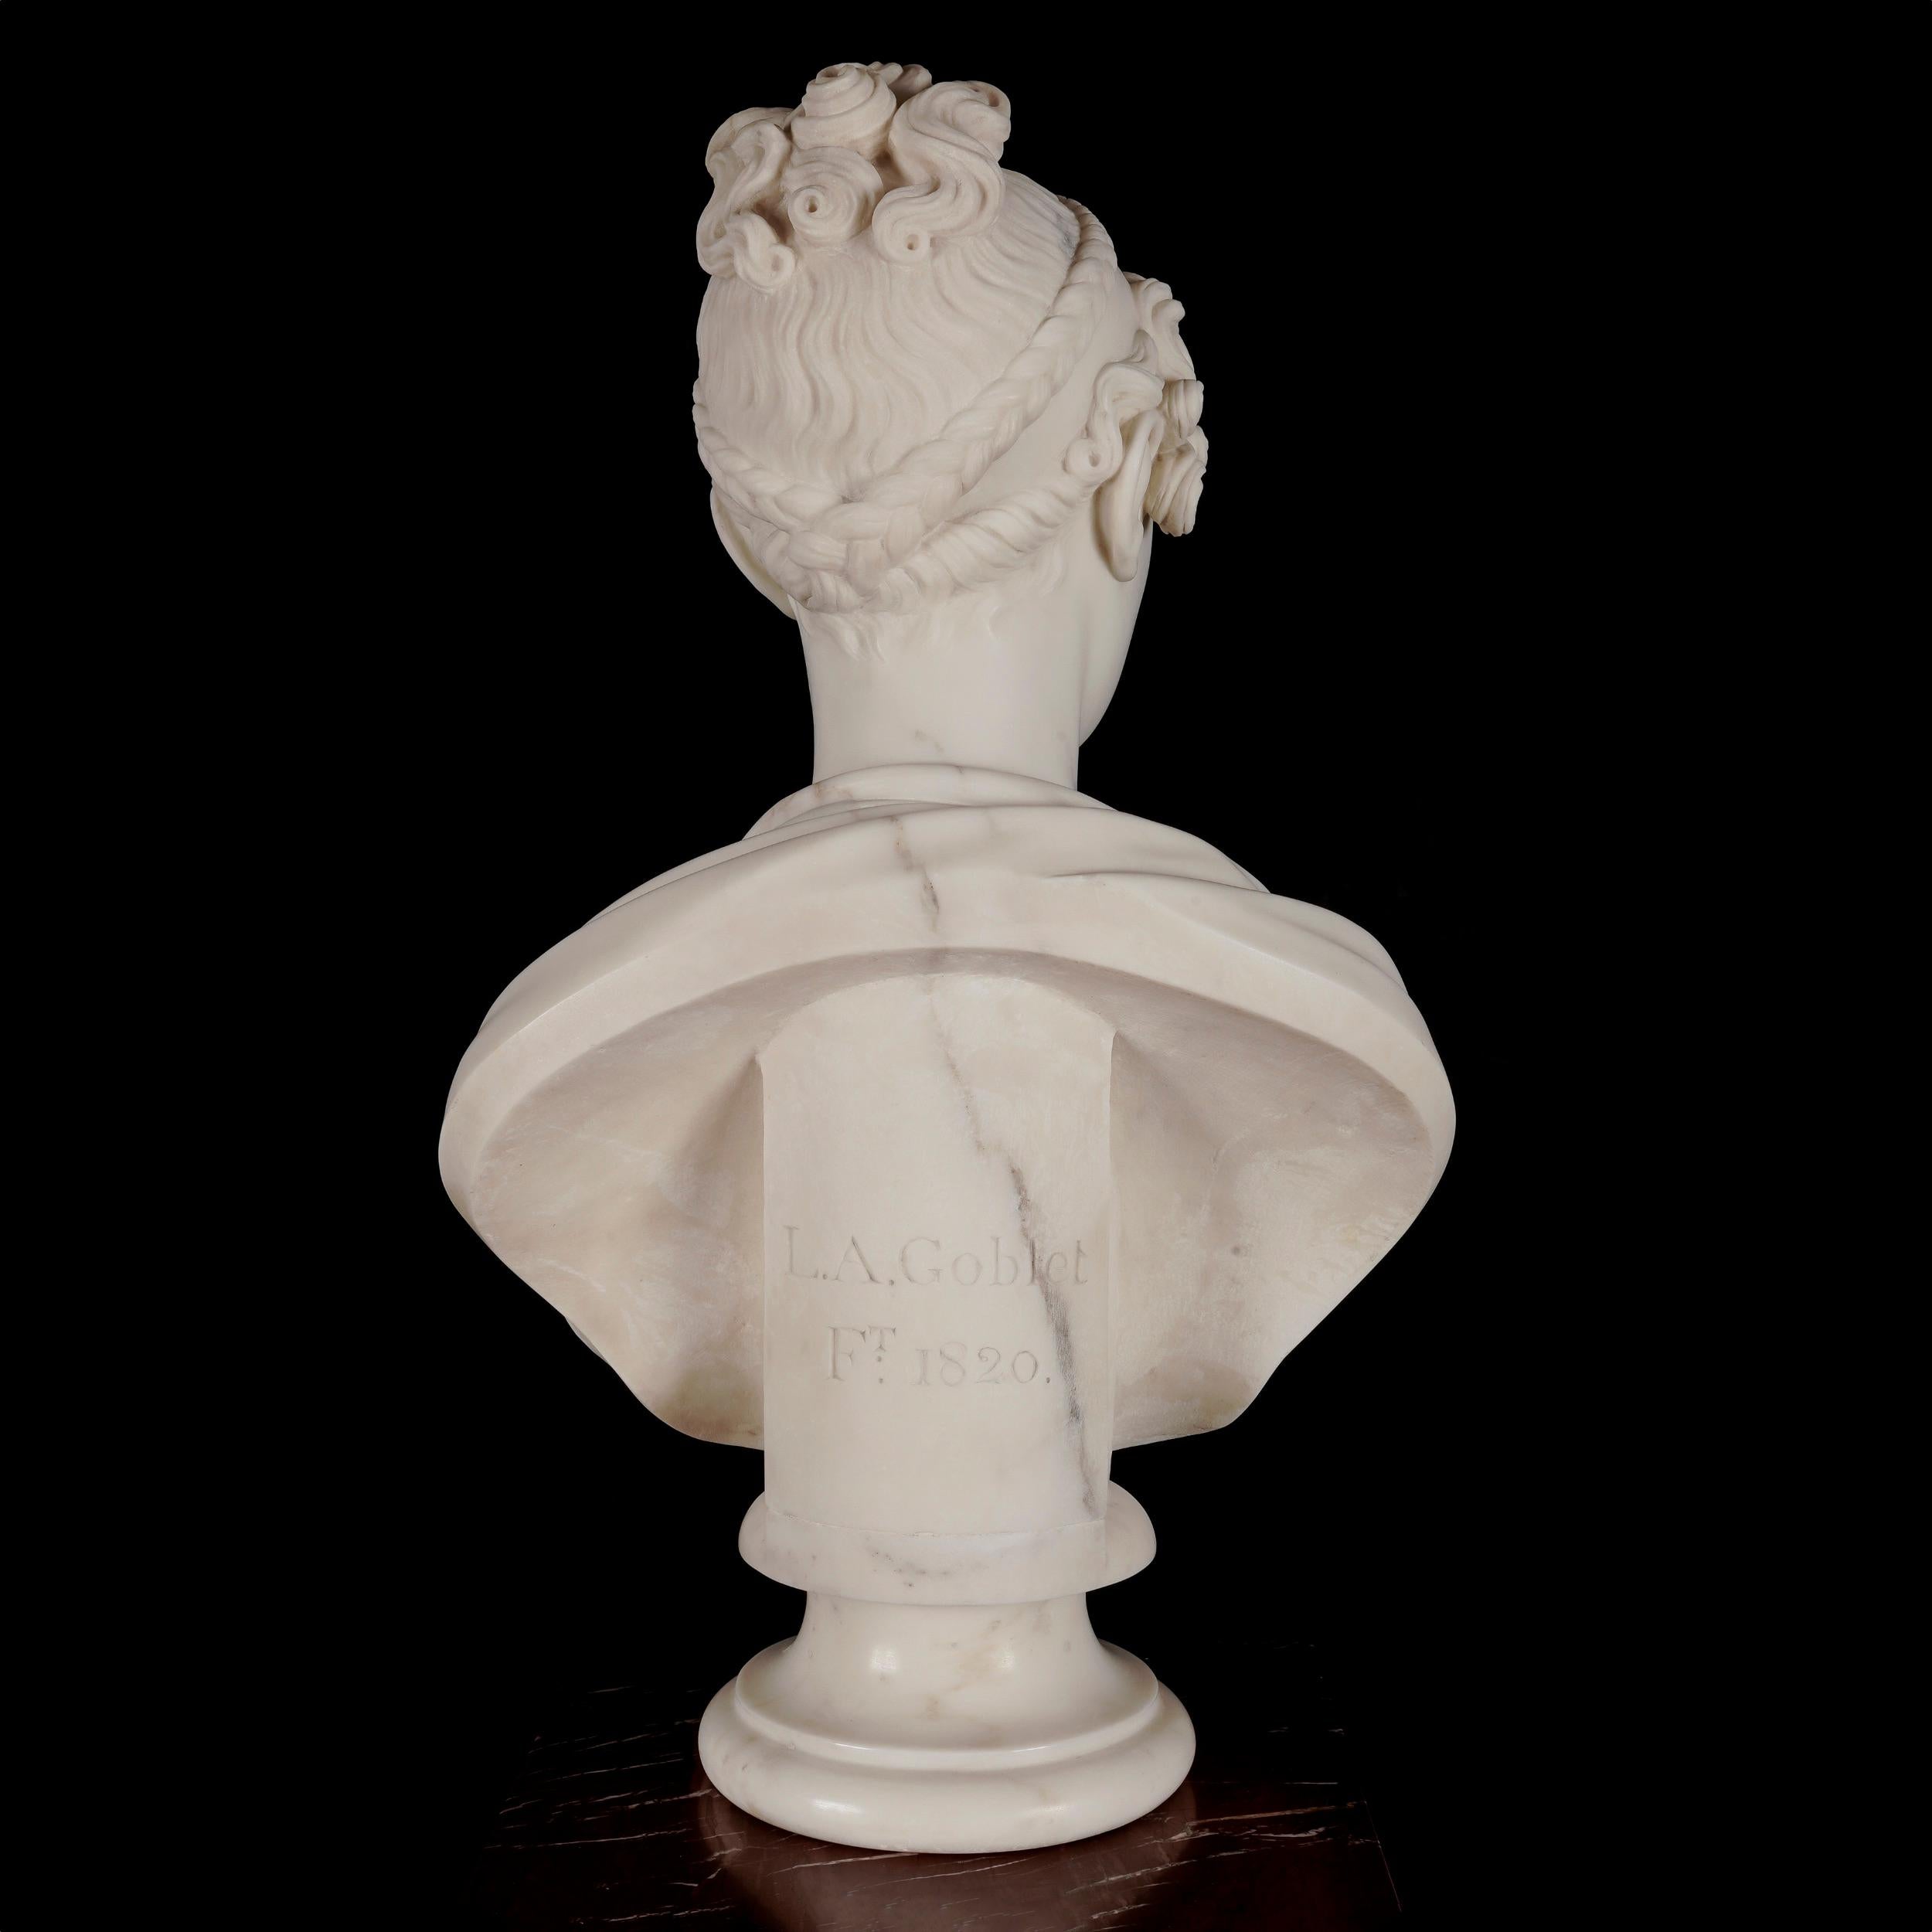 English 19th Century Neoclassical Marble Portrait Bust of a Lady by L.A. Goblet For Sale